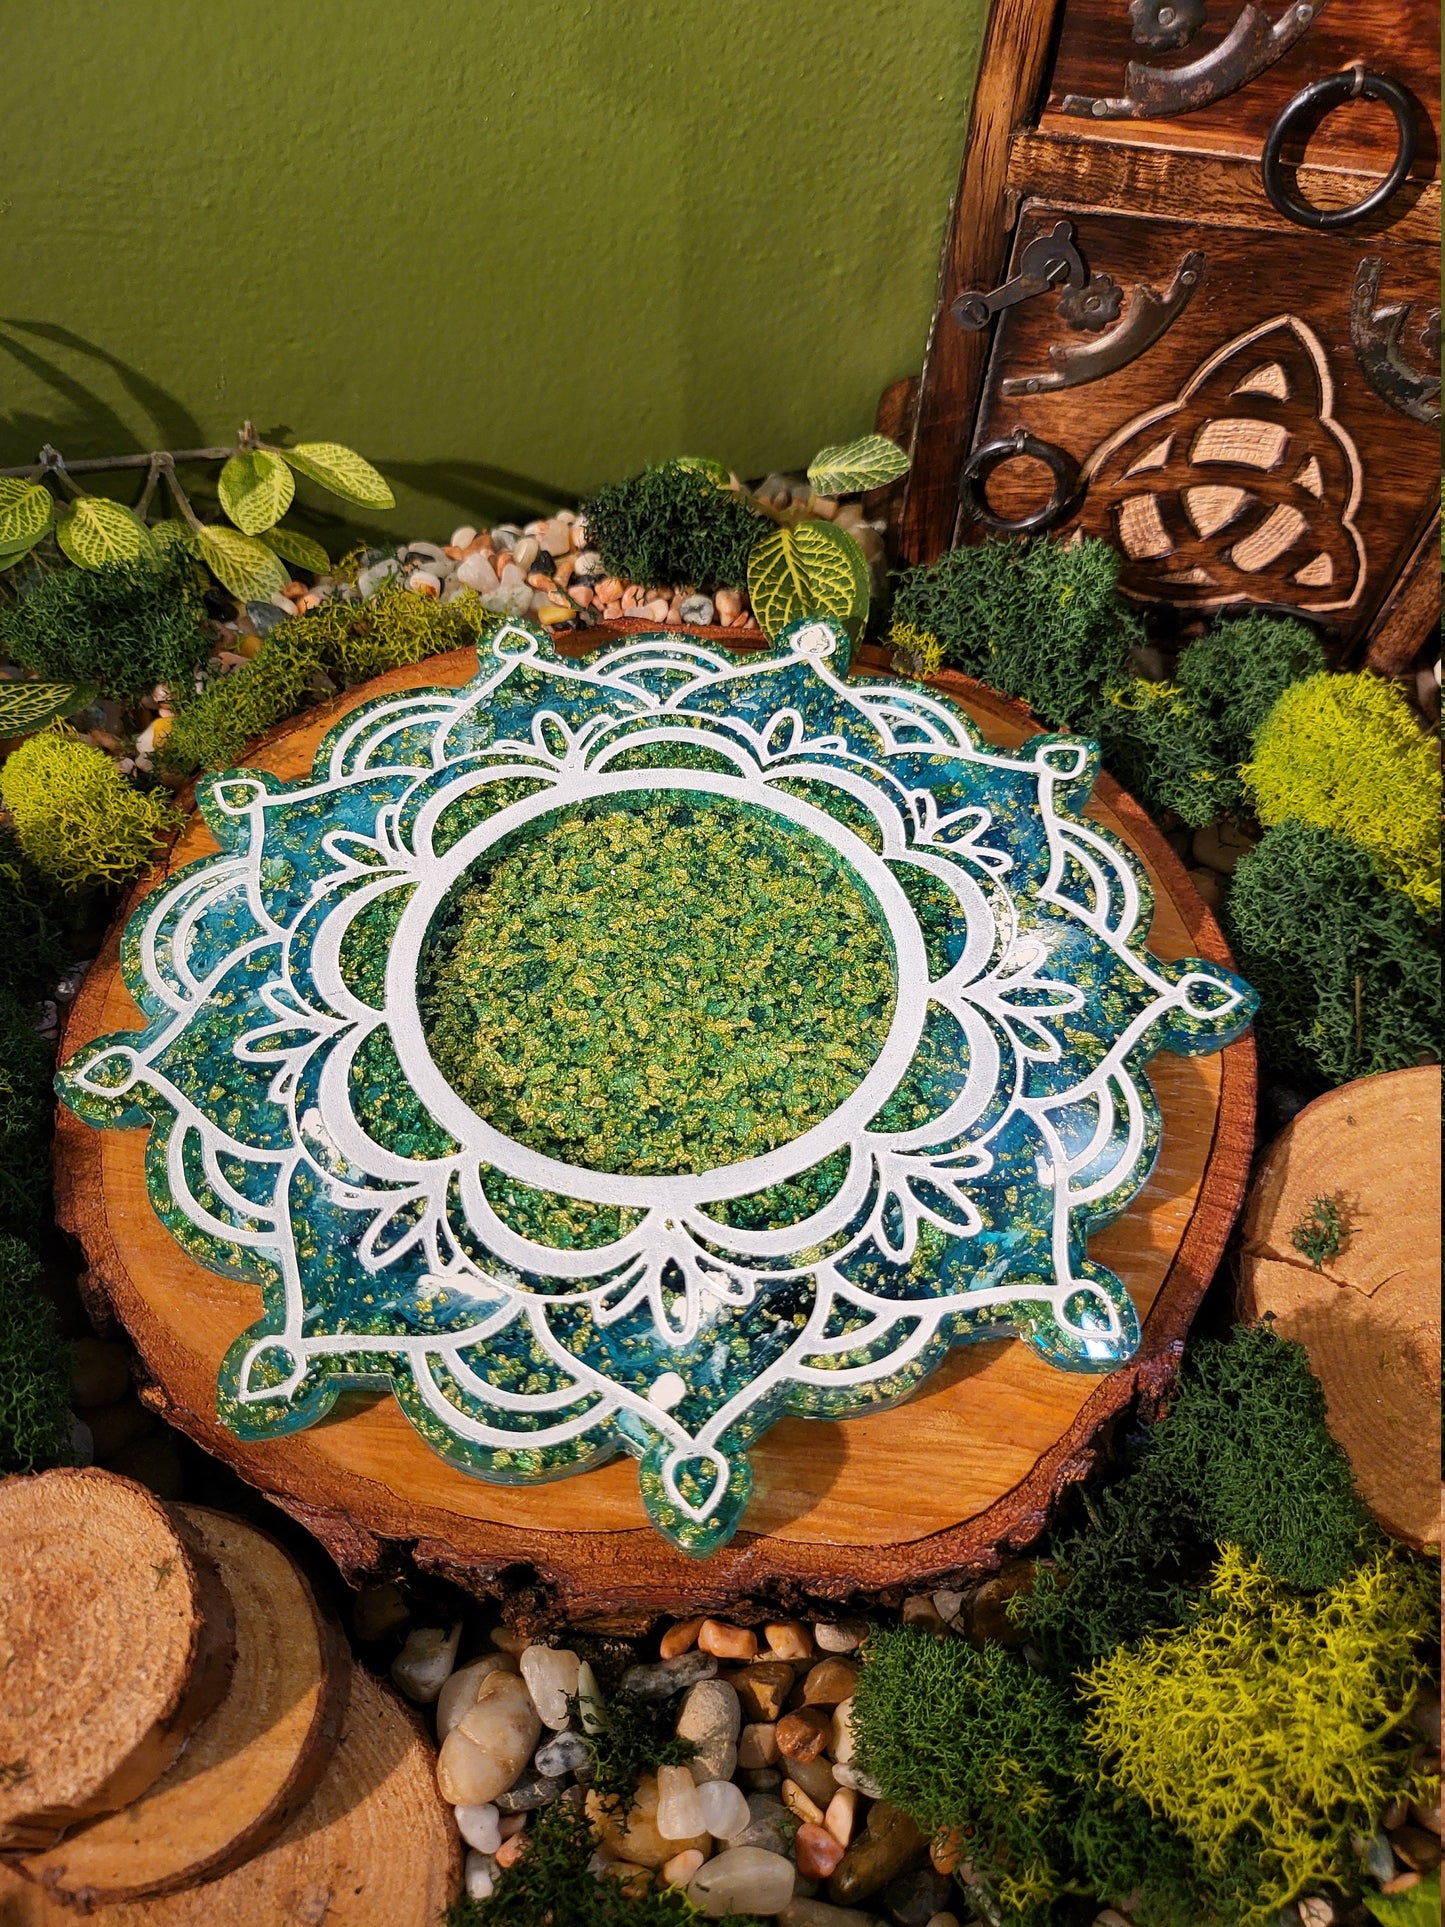 Ocean Tides Mandala Tray, Faux Gold Flakes, Transparent Blue and White Acrylic Paint Outline